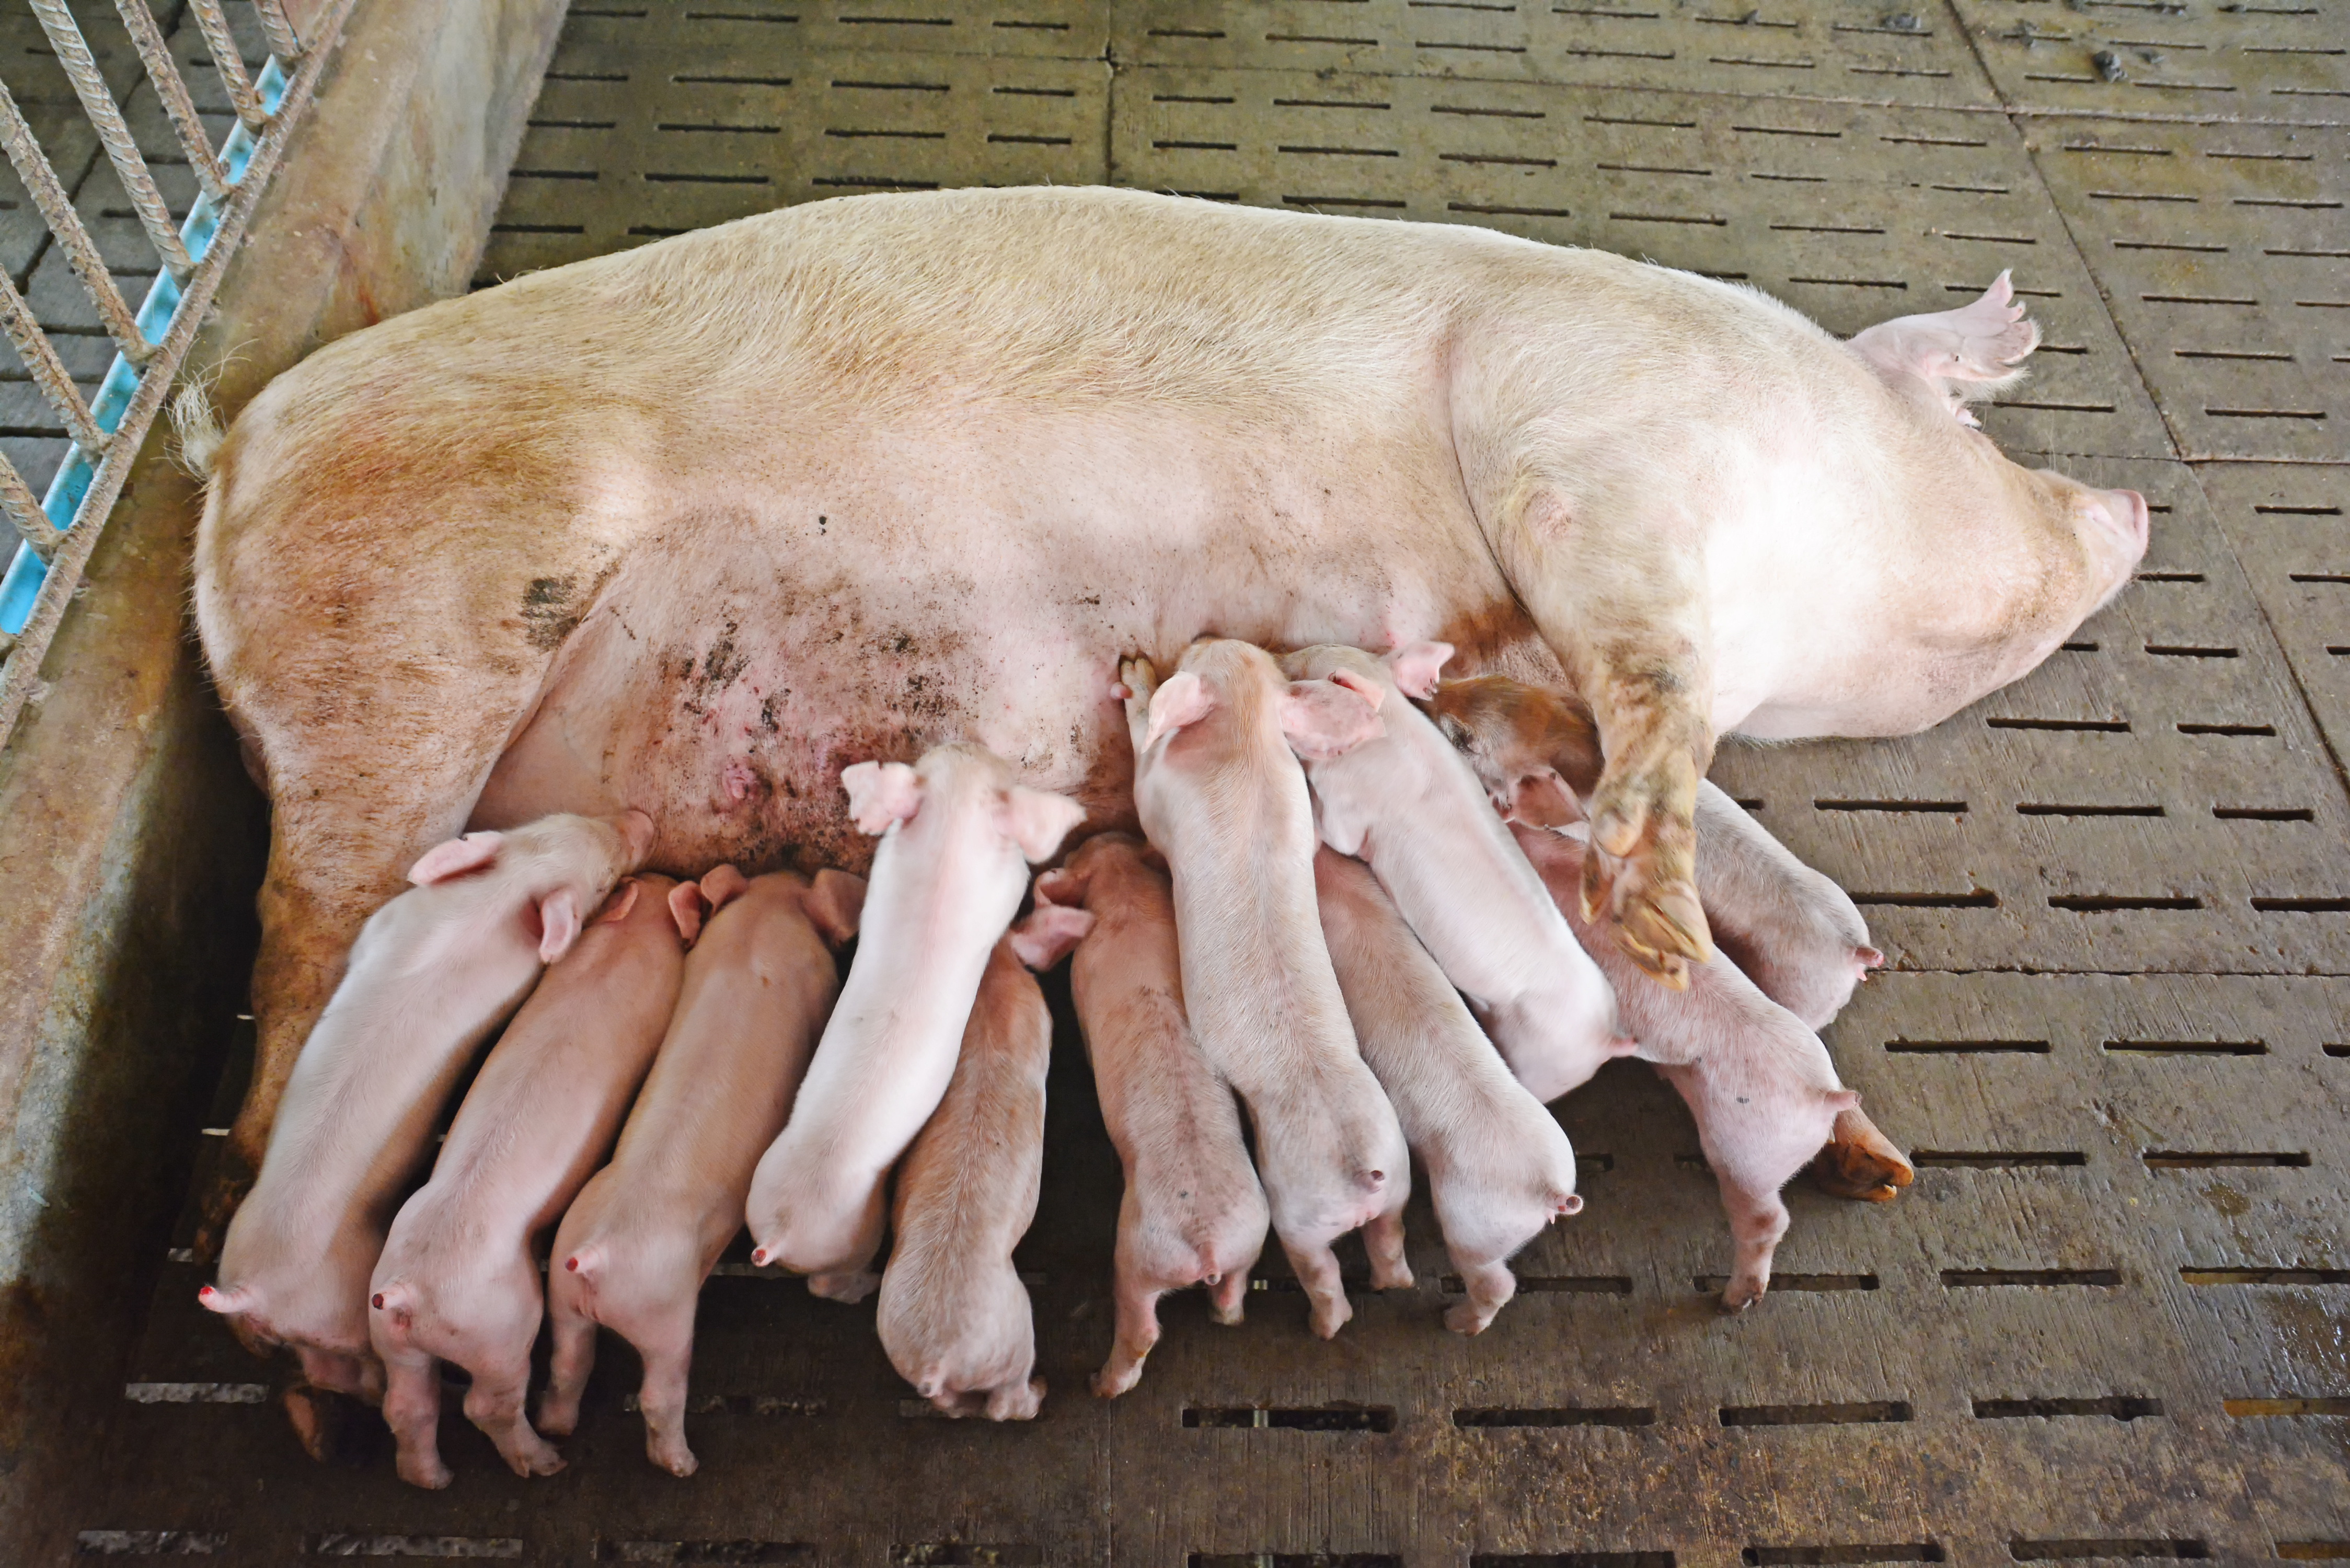 Keeping both sows and piglets in temperature-controlled, shady conditions is critical during farrowing and weaning as both mother and offspring can overheat quickly